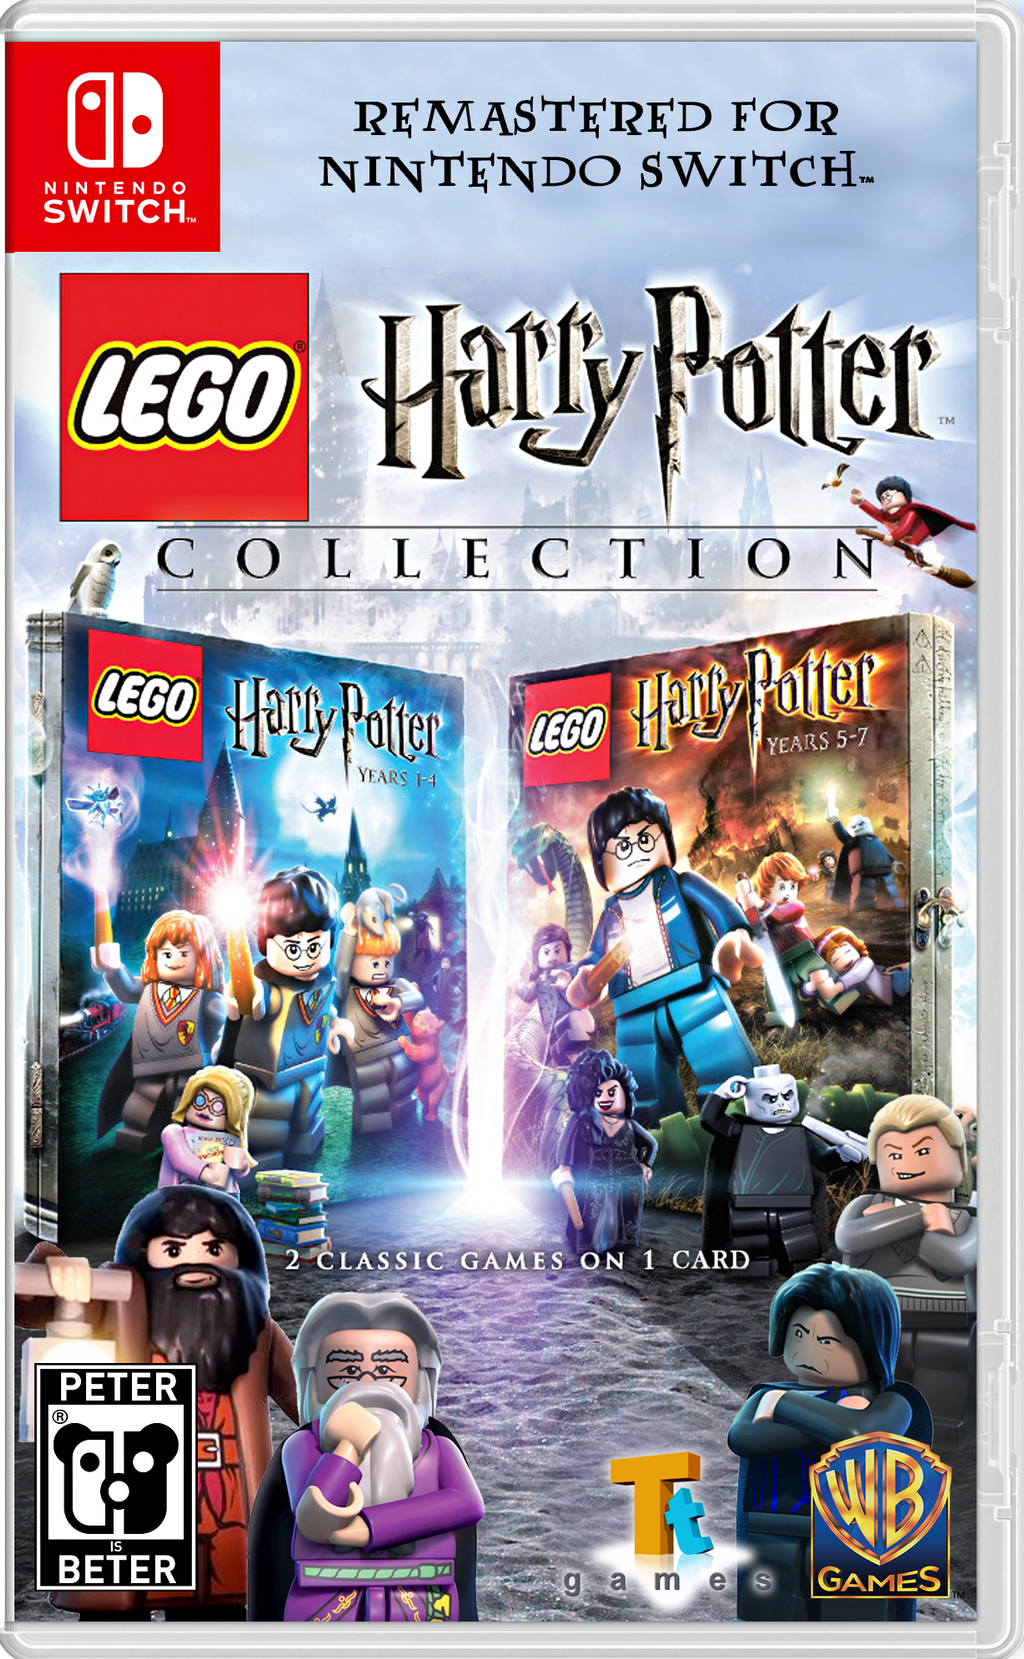 LEGO Harry Potter Collection Nintendo Switch by PeterisBeter on DeviantArt